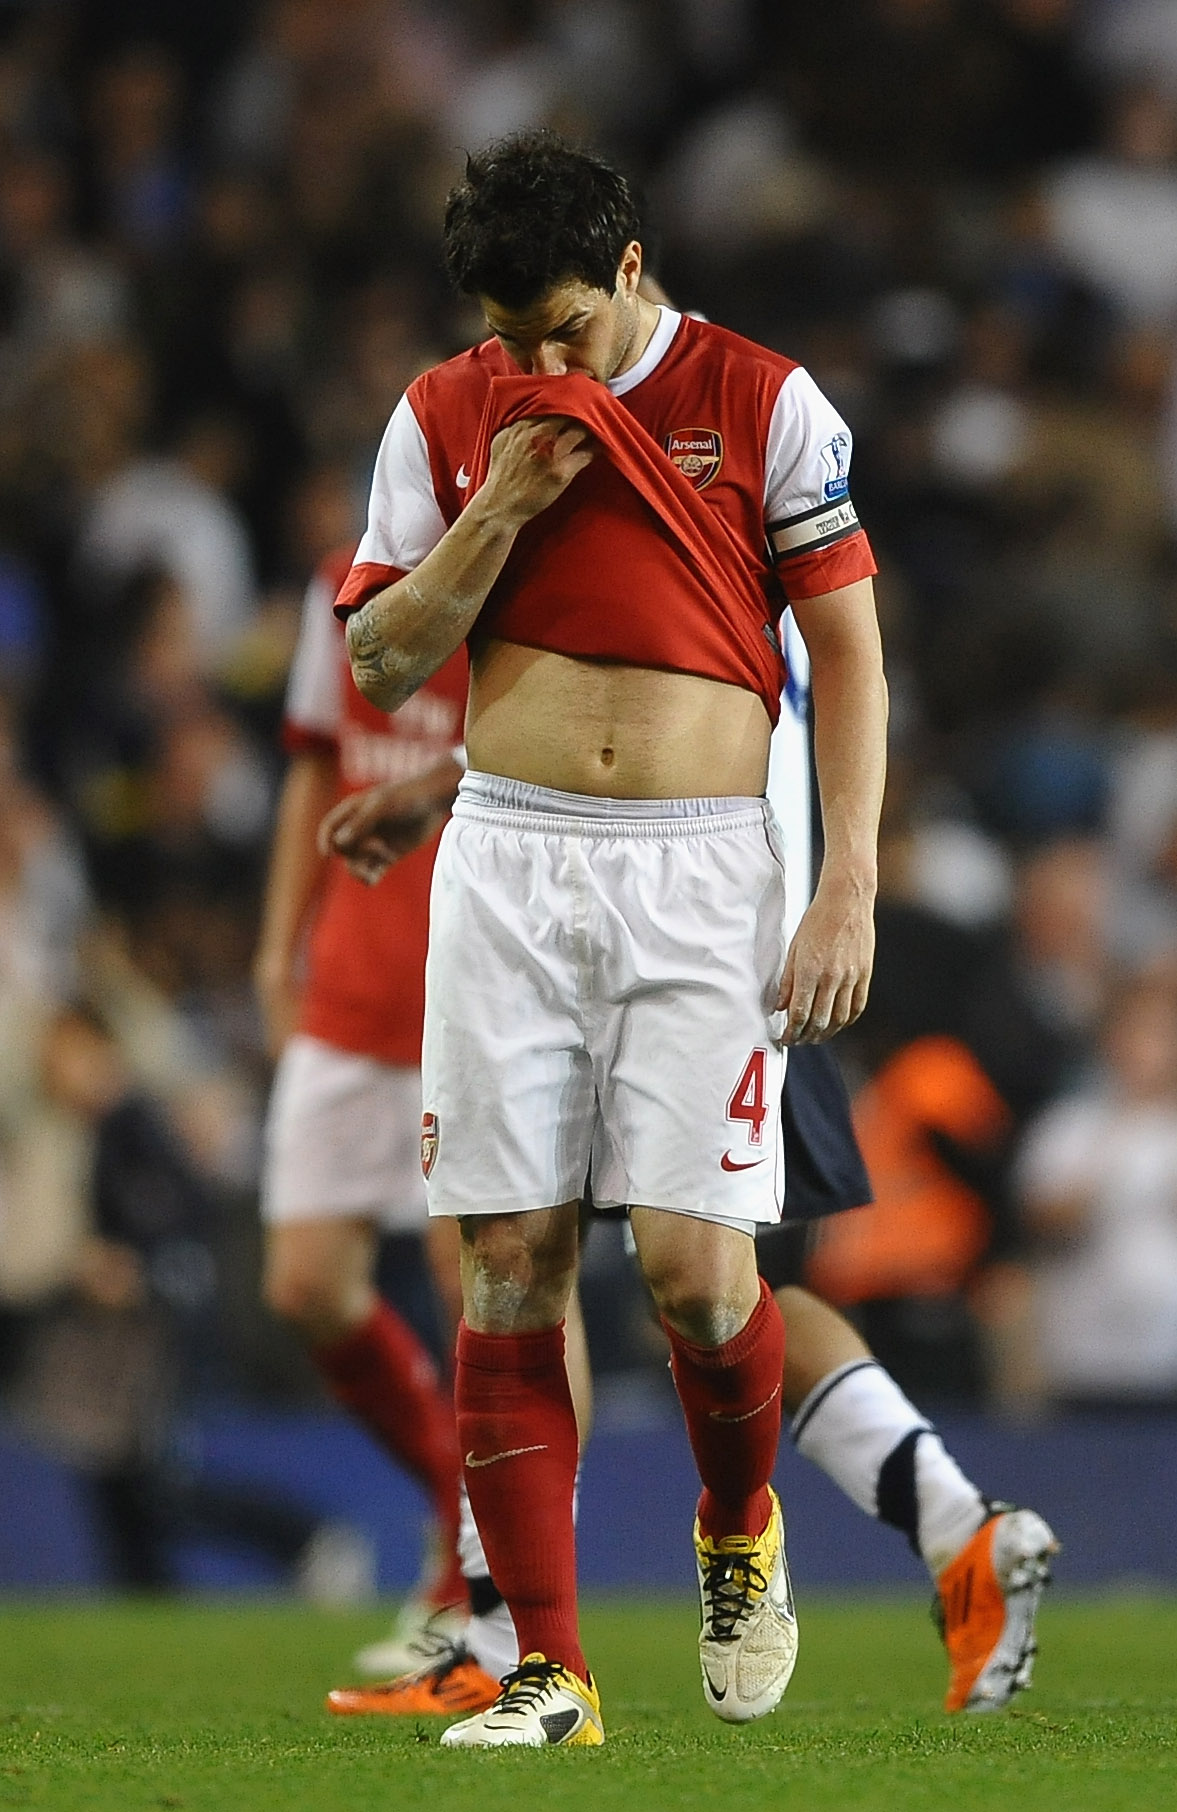 LONDON, ENGLAND - APRIL 20:  Cesc Fabregas of Arsenal walks off dejected after the Barclays Premier League match between Tottenham Hotspur and Arsenal at White Hart Lane on April 20, 2011 in London, England.  (Photo by Laurence Griffiths/Getty Images)